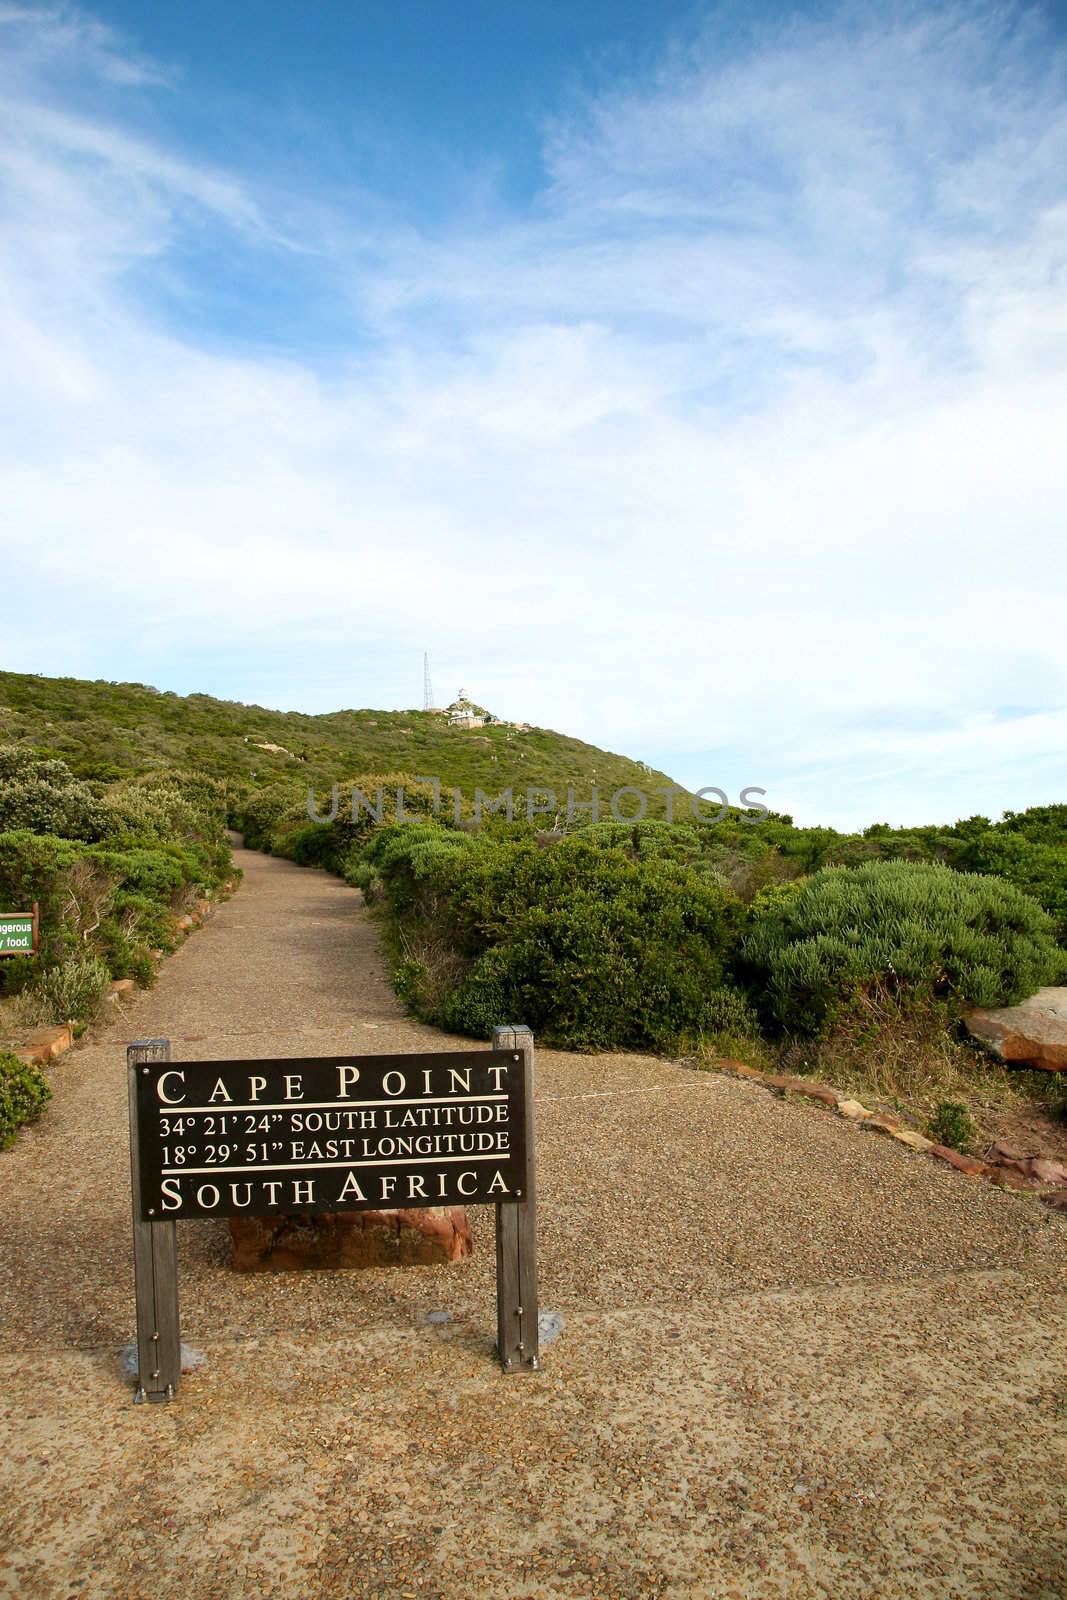 Cape of good hope signboard in Cape point - Cape Town